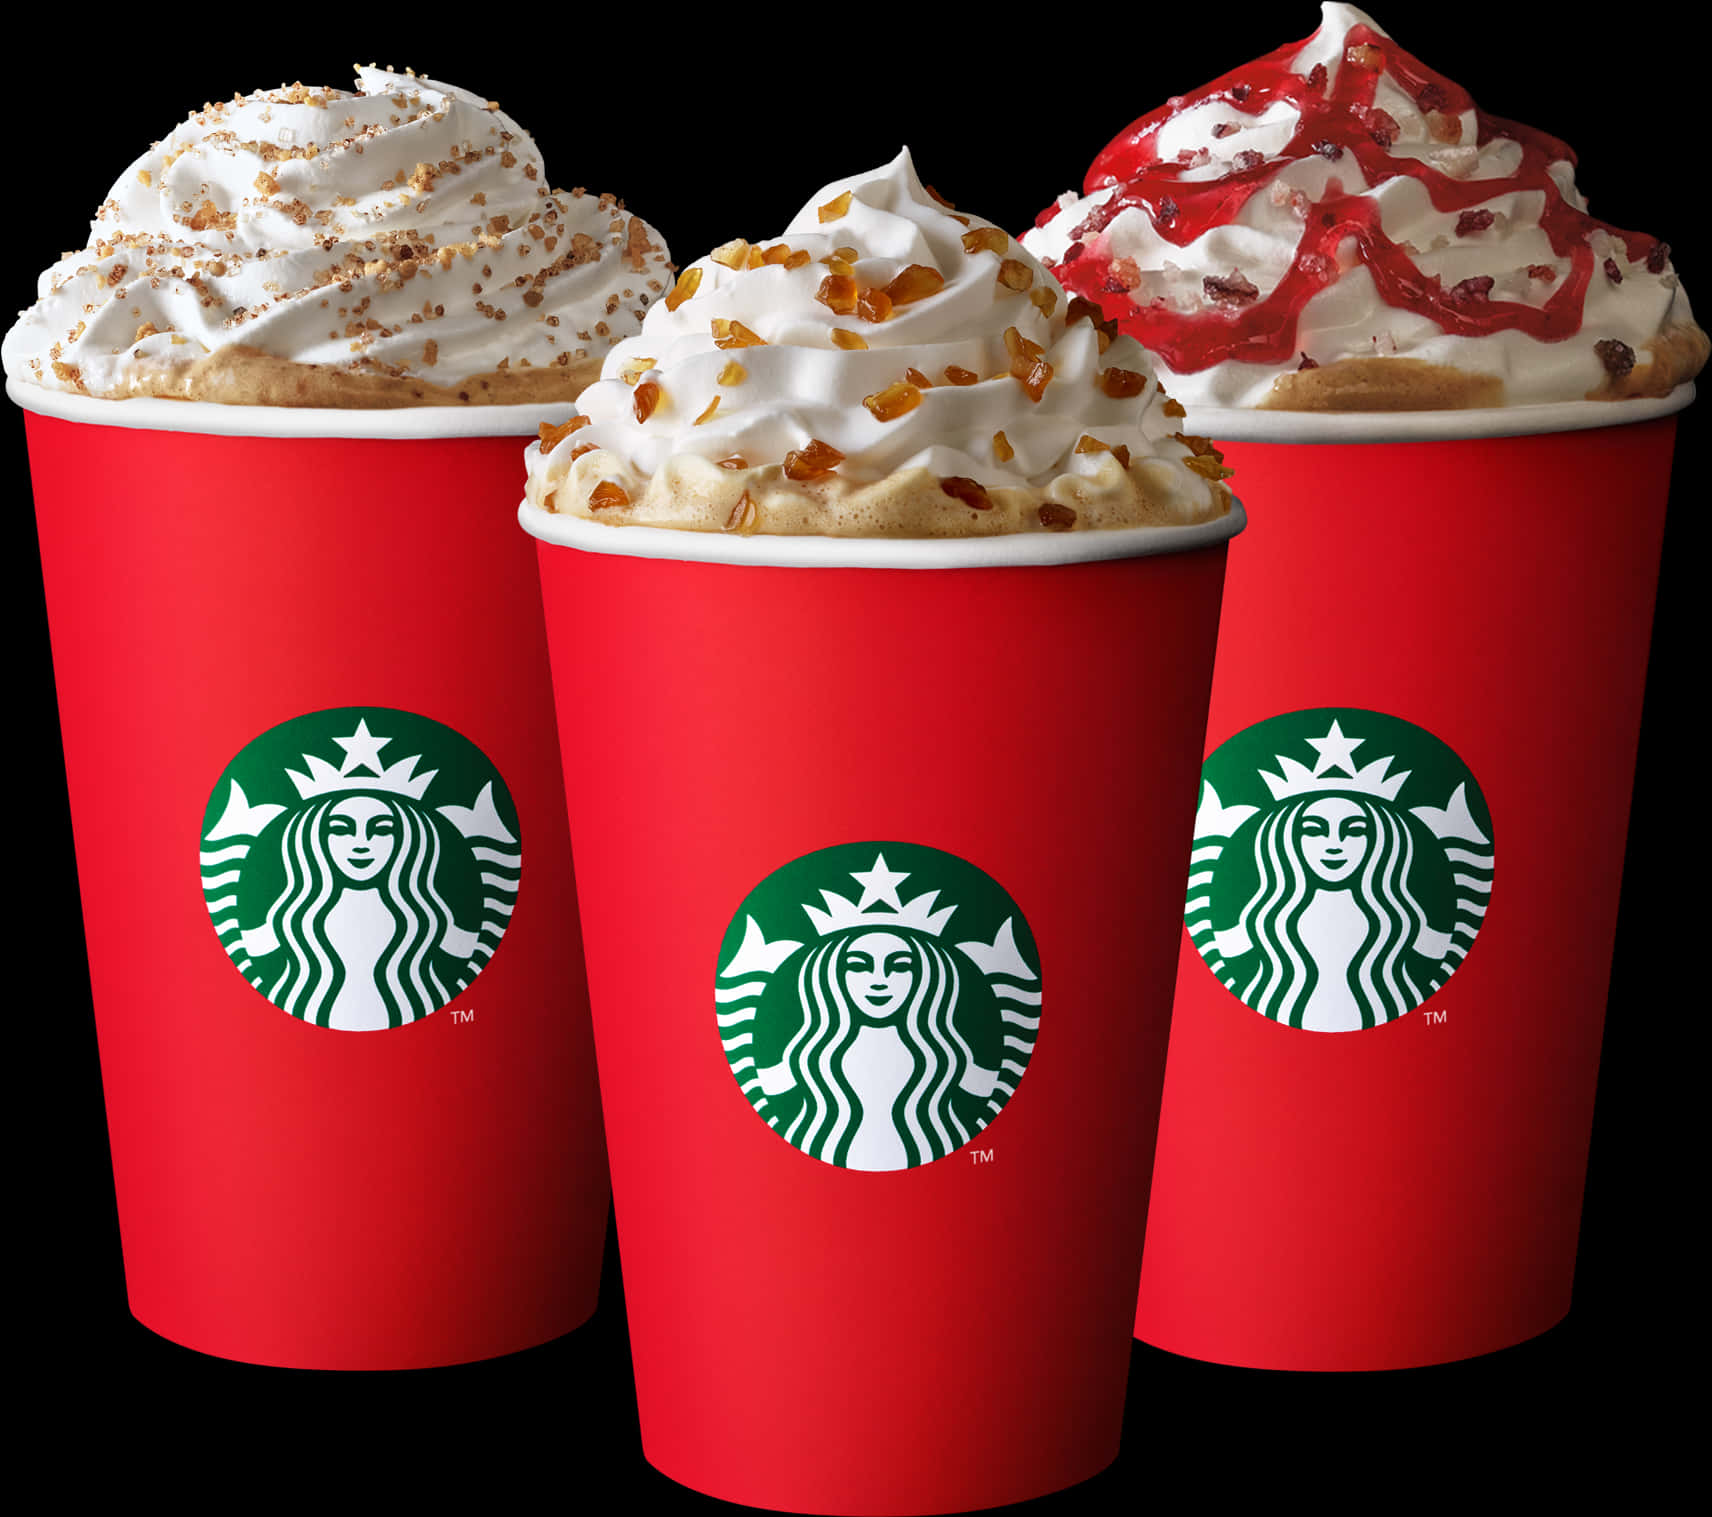 A Group Of Red Cups With Whipped Cream And Toppings